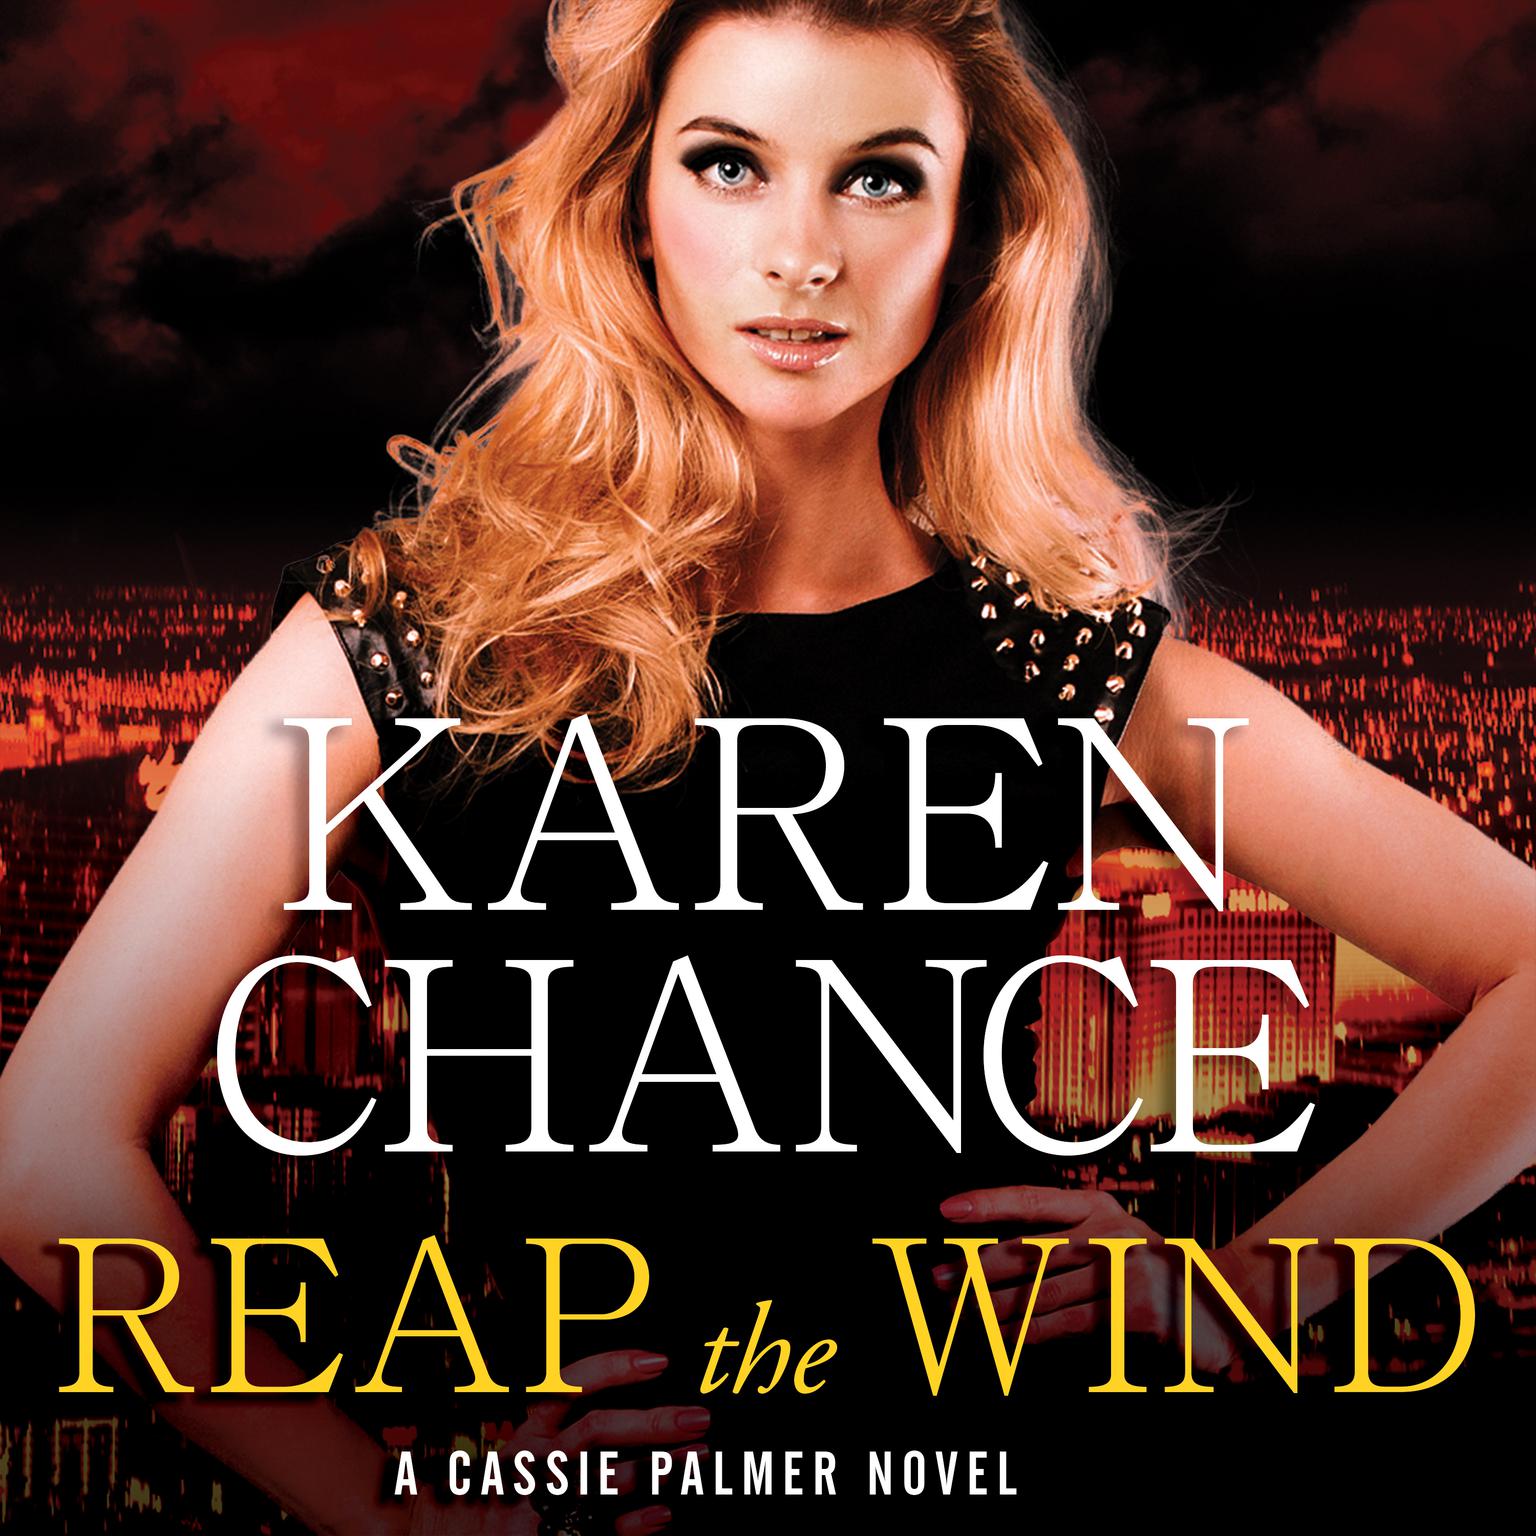 Reap the Wind Audiobook, by Karen Chance